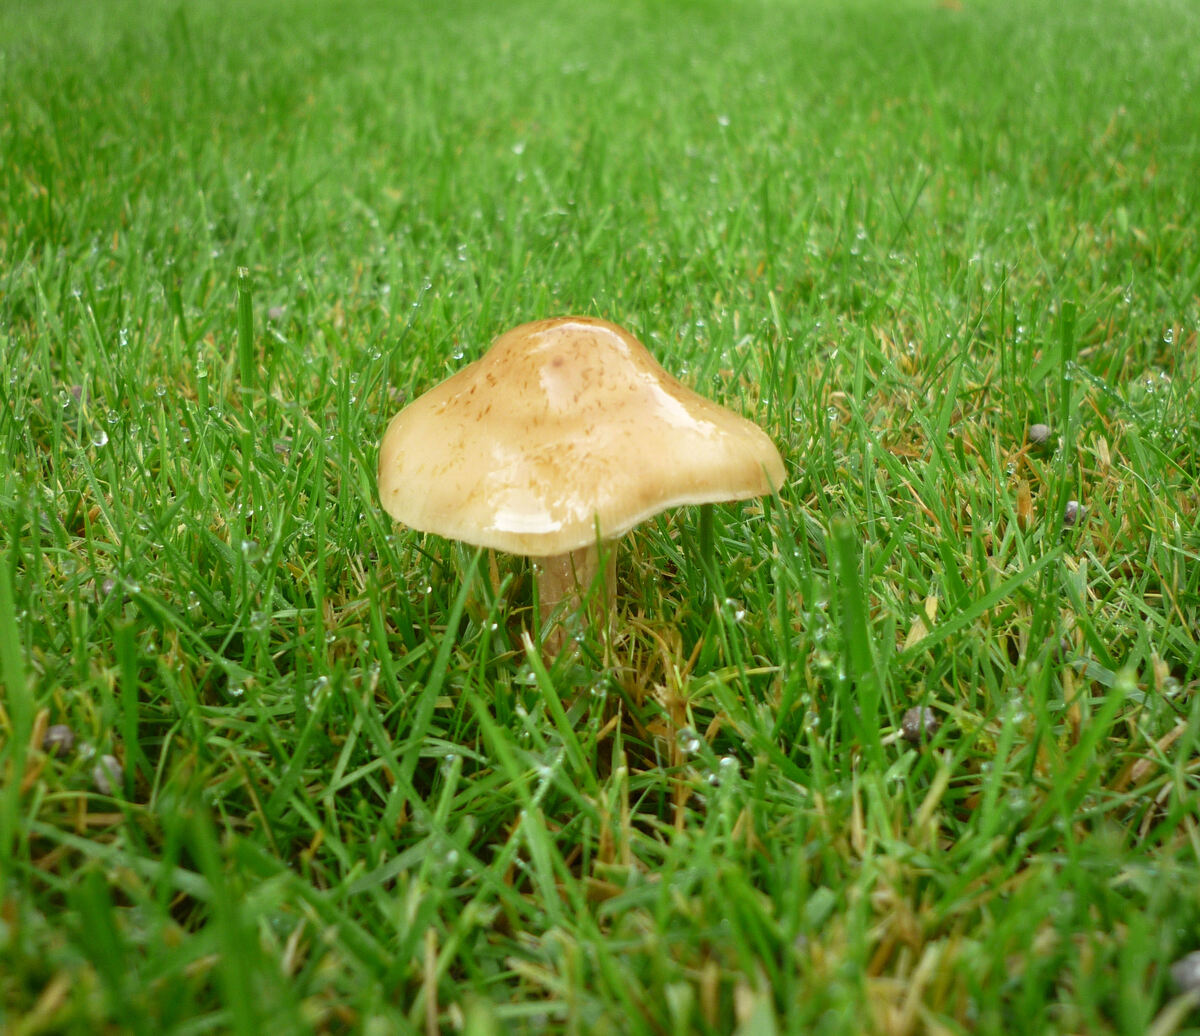 Why Do Mushrooms Grow In Grass